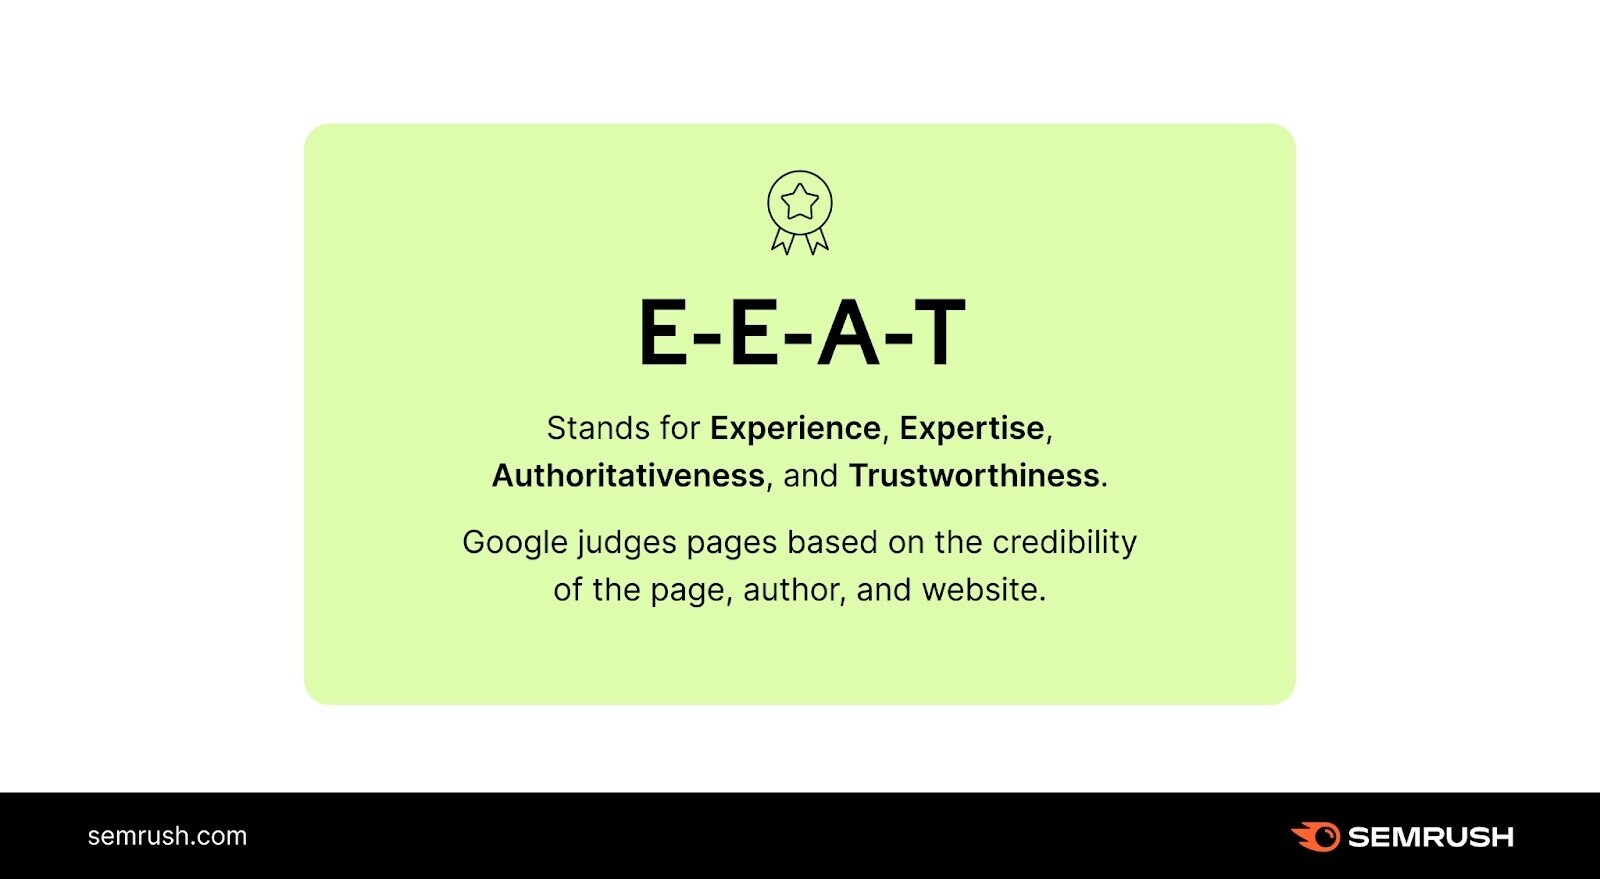 Text block explaining the acronym E-E-A-T, which stands for Experience, Expertise, Authoritativeness, and Trustworthiness.